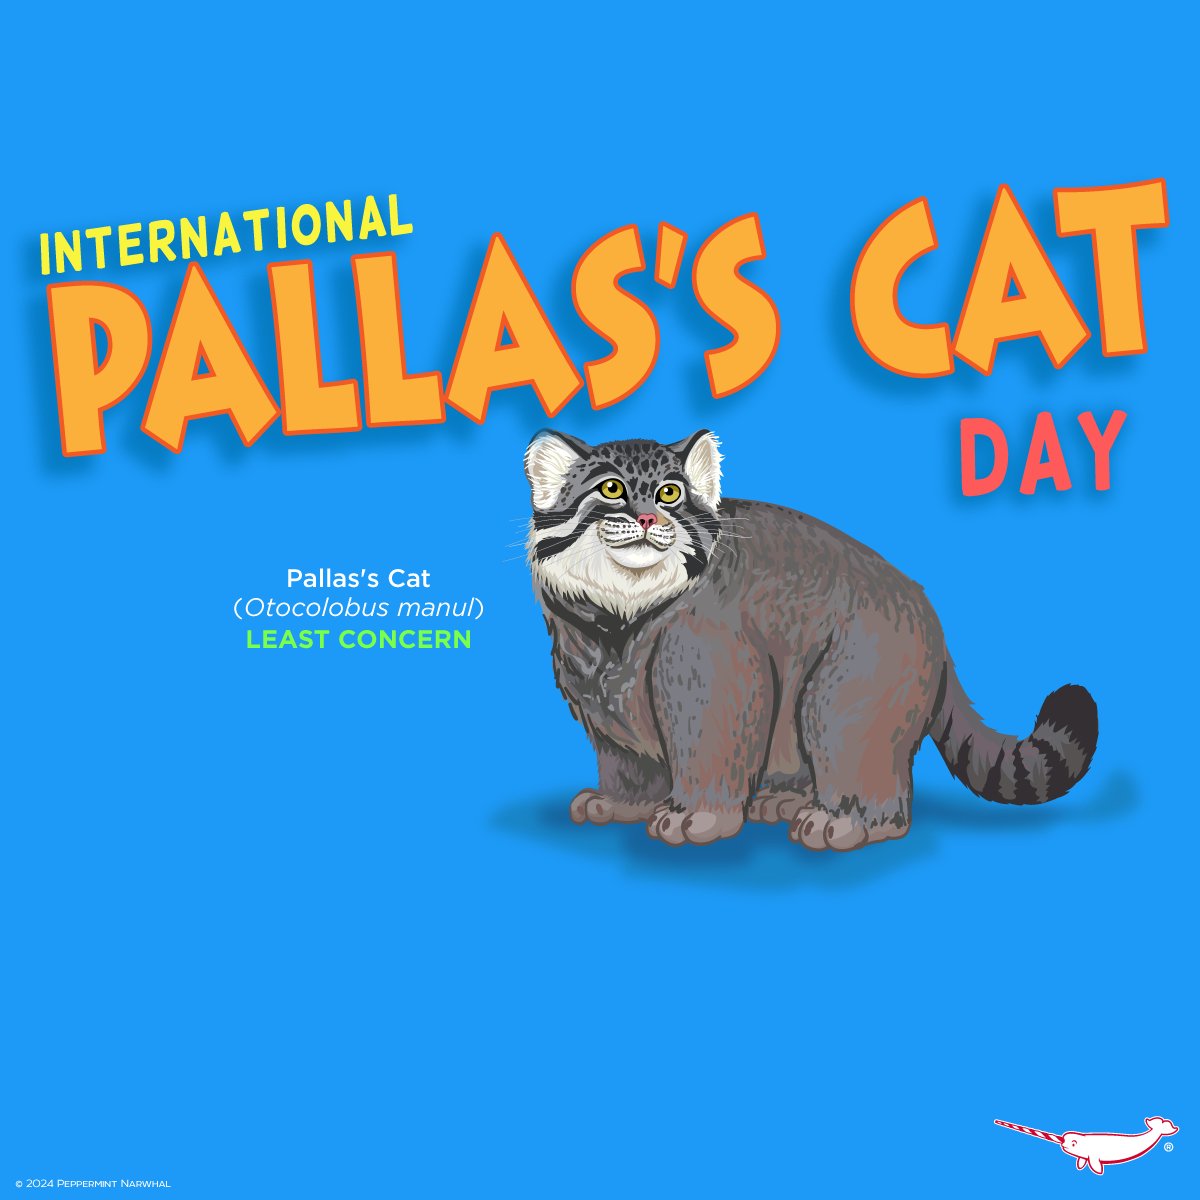 #PallassCatDay

Earth Day SALE - Save 20% Off Everything in the #PeppermintNarwhal Store.
Shop Now: peppermintnarwhal.com
International Shoppers visit our Etsy store:
etsy.com/shop/Peppermin…

#PallasCatDay #PallassCat #PallasCat #Otocolobus #manul